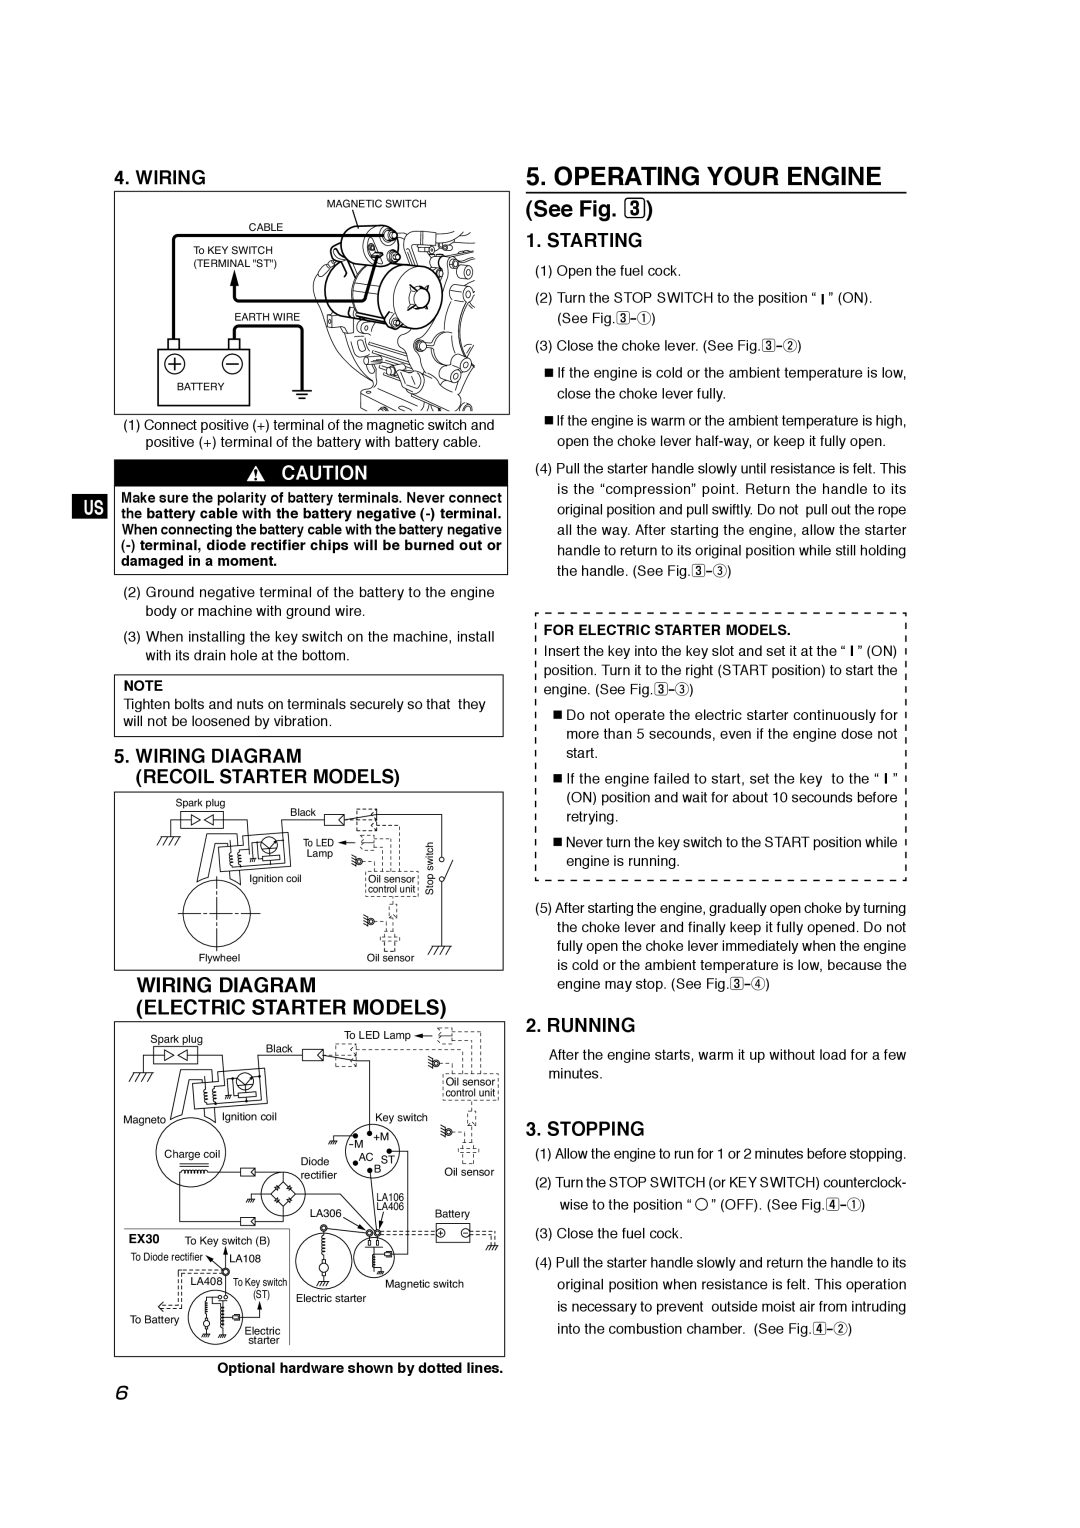 Subaru Robin Power Products EX30 Operating Your Engine, Wiring Diagram Electric Starter Models, Starting, Running, See Fig 